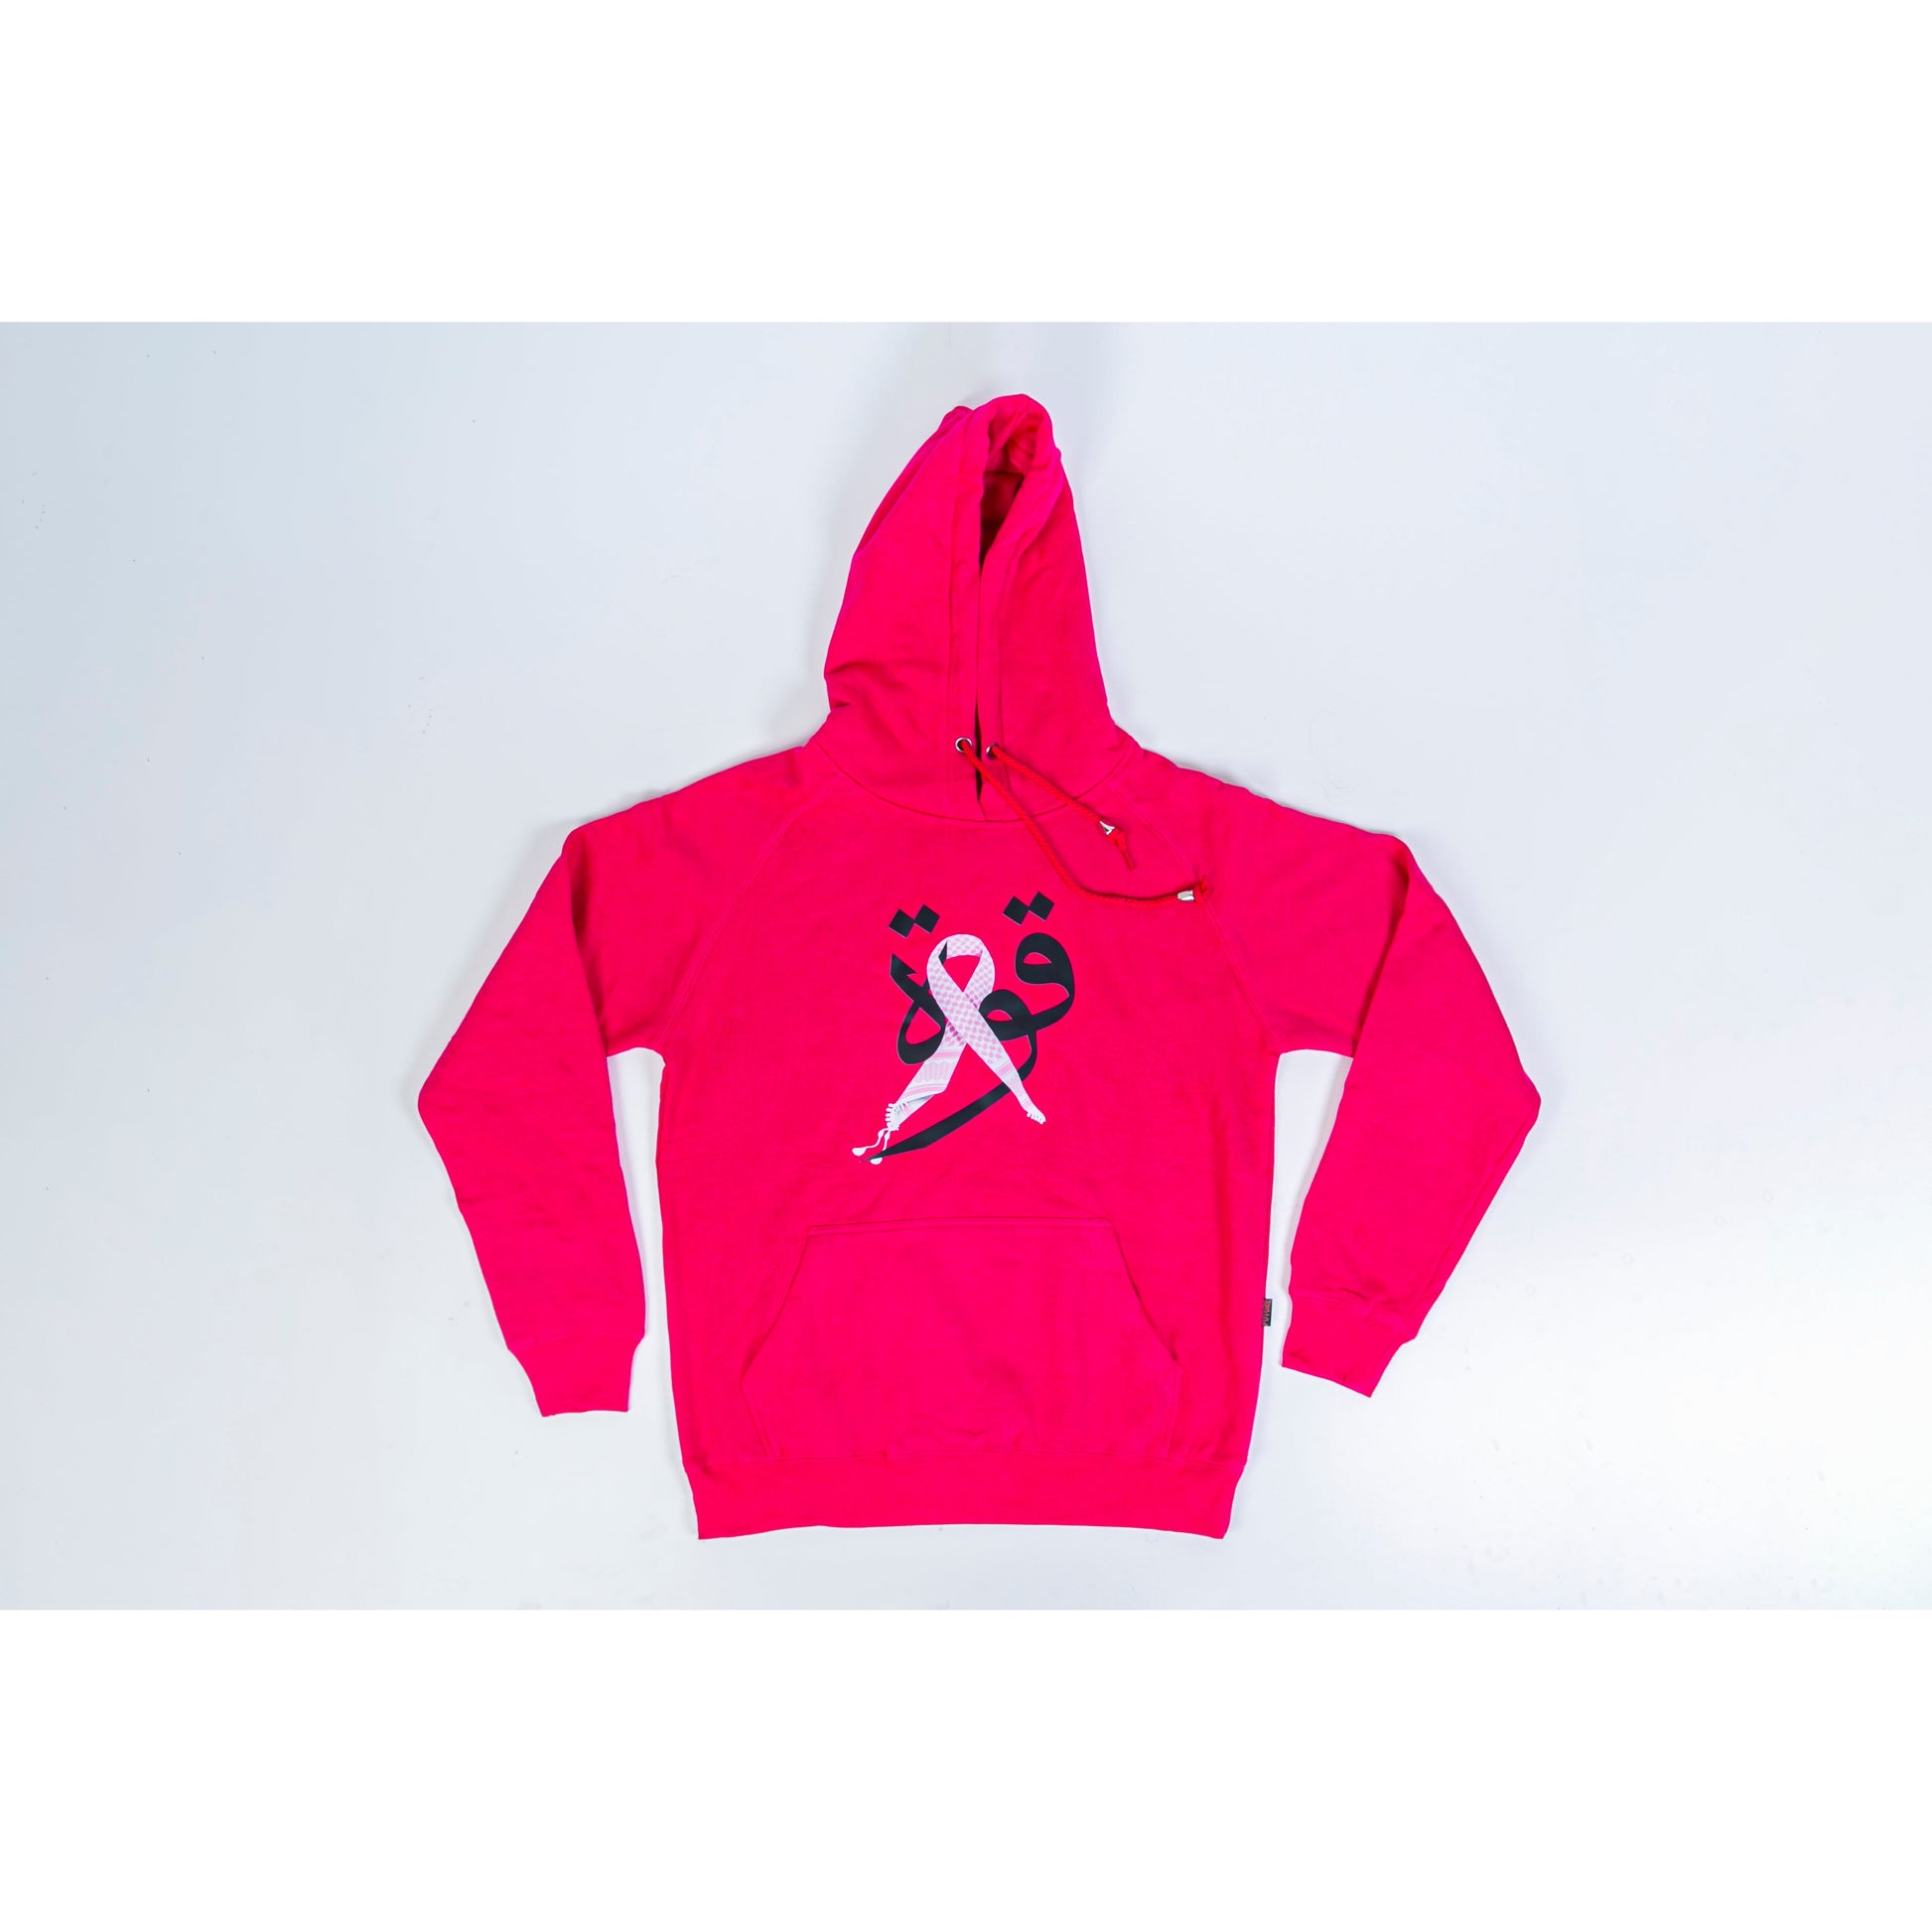 Hoodie in pink color -   - Breast cancer